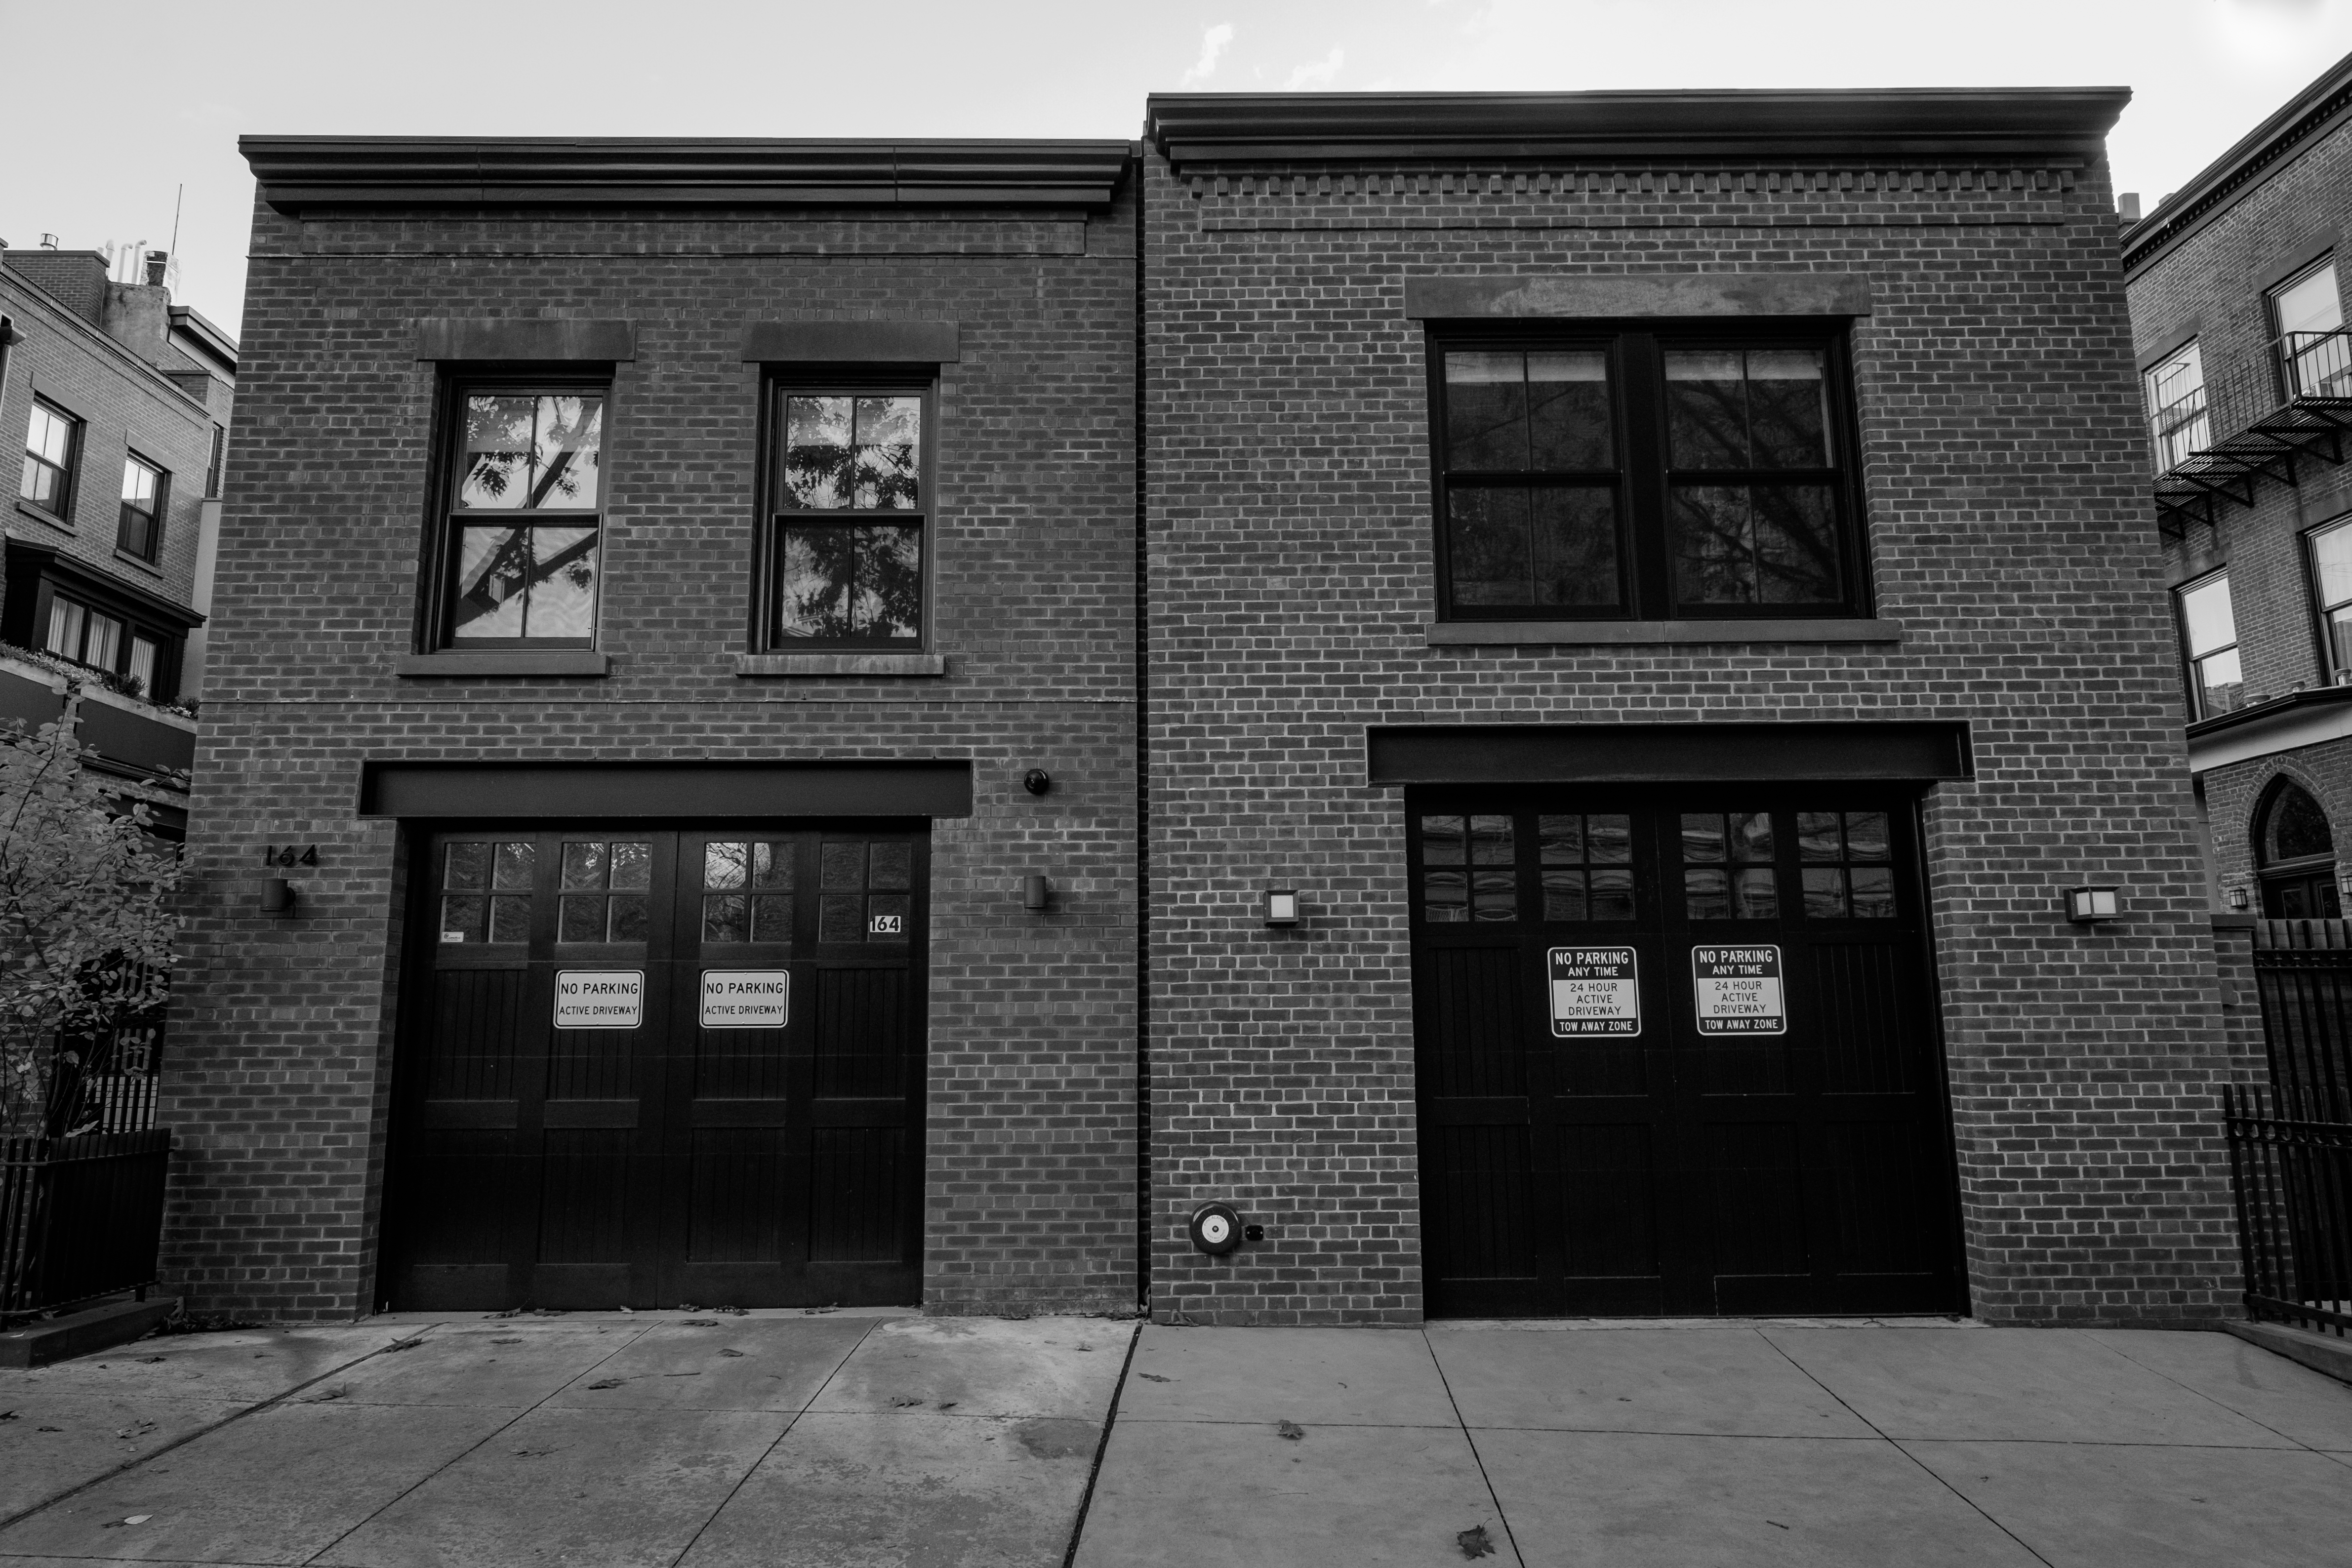 garages-cobble-hill-no-parking-brooklyn-black-and-white-photograpy